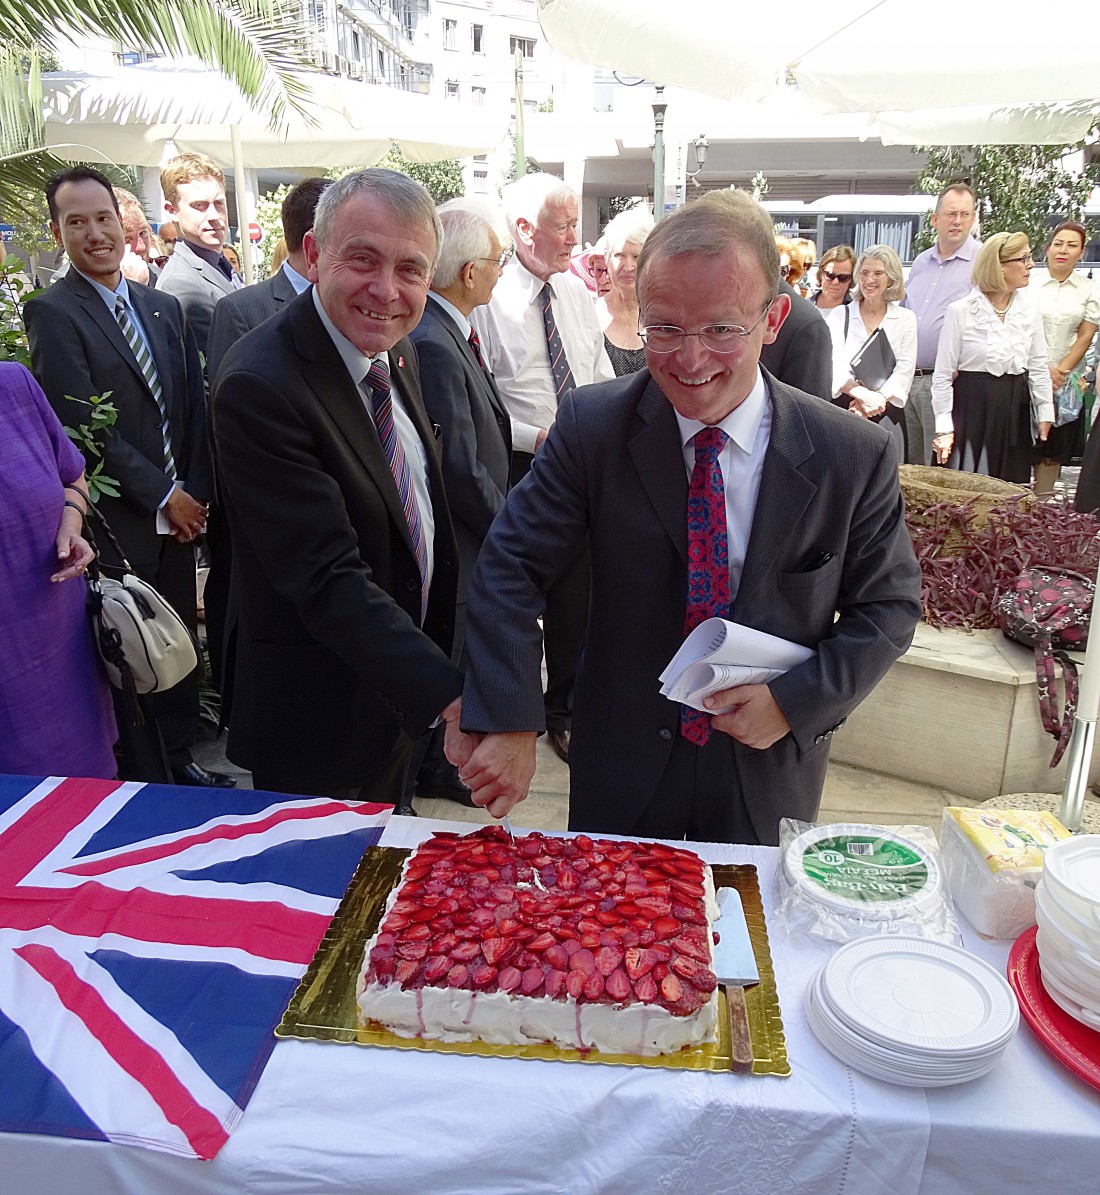 Queen's bday cake cutting 3888x4225